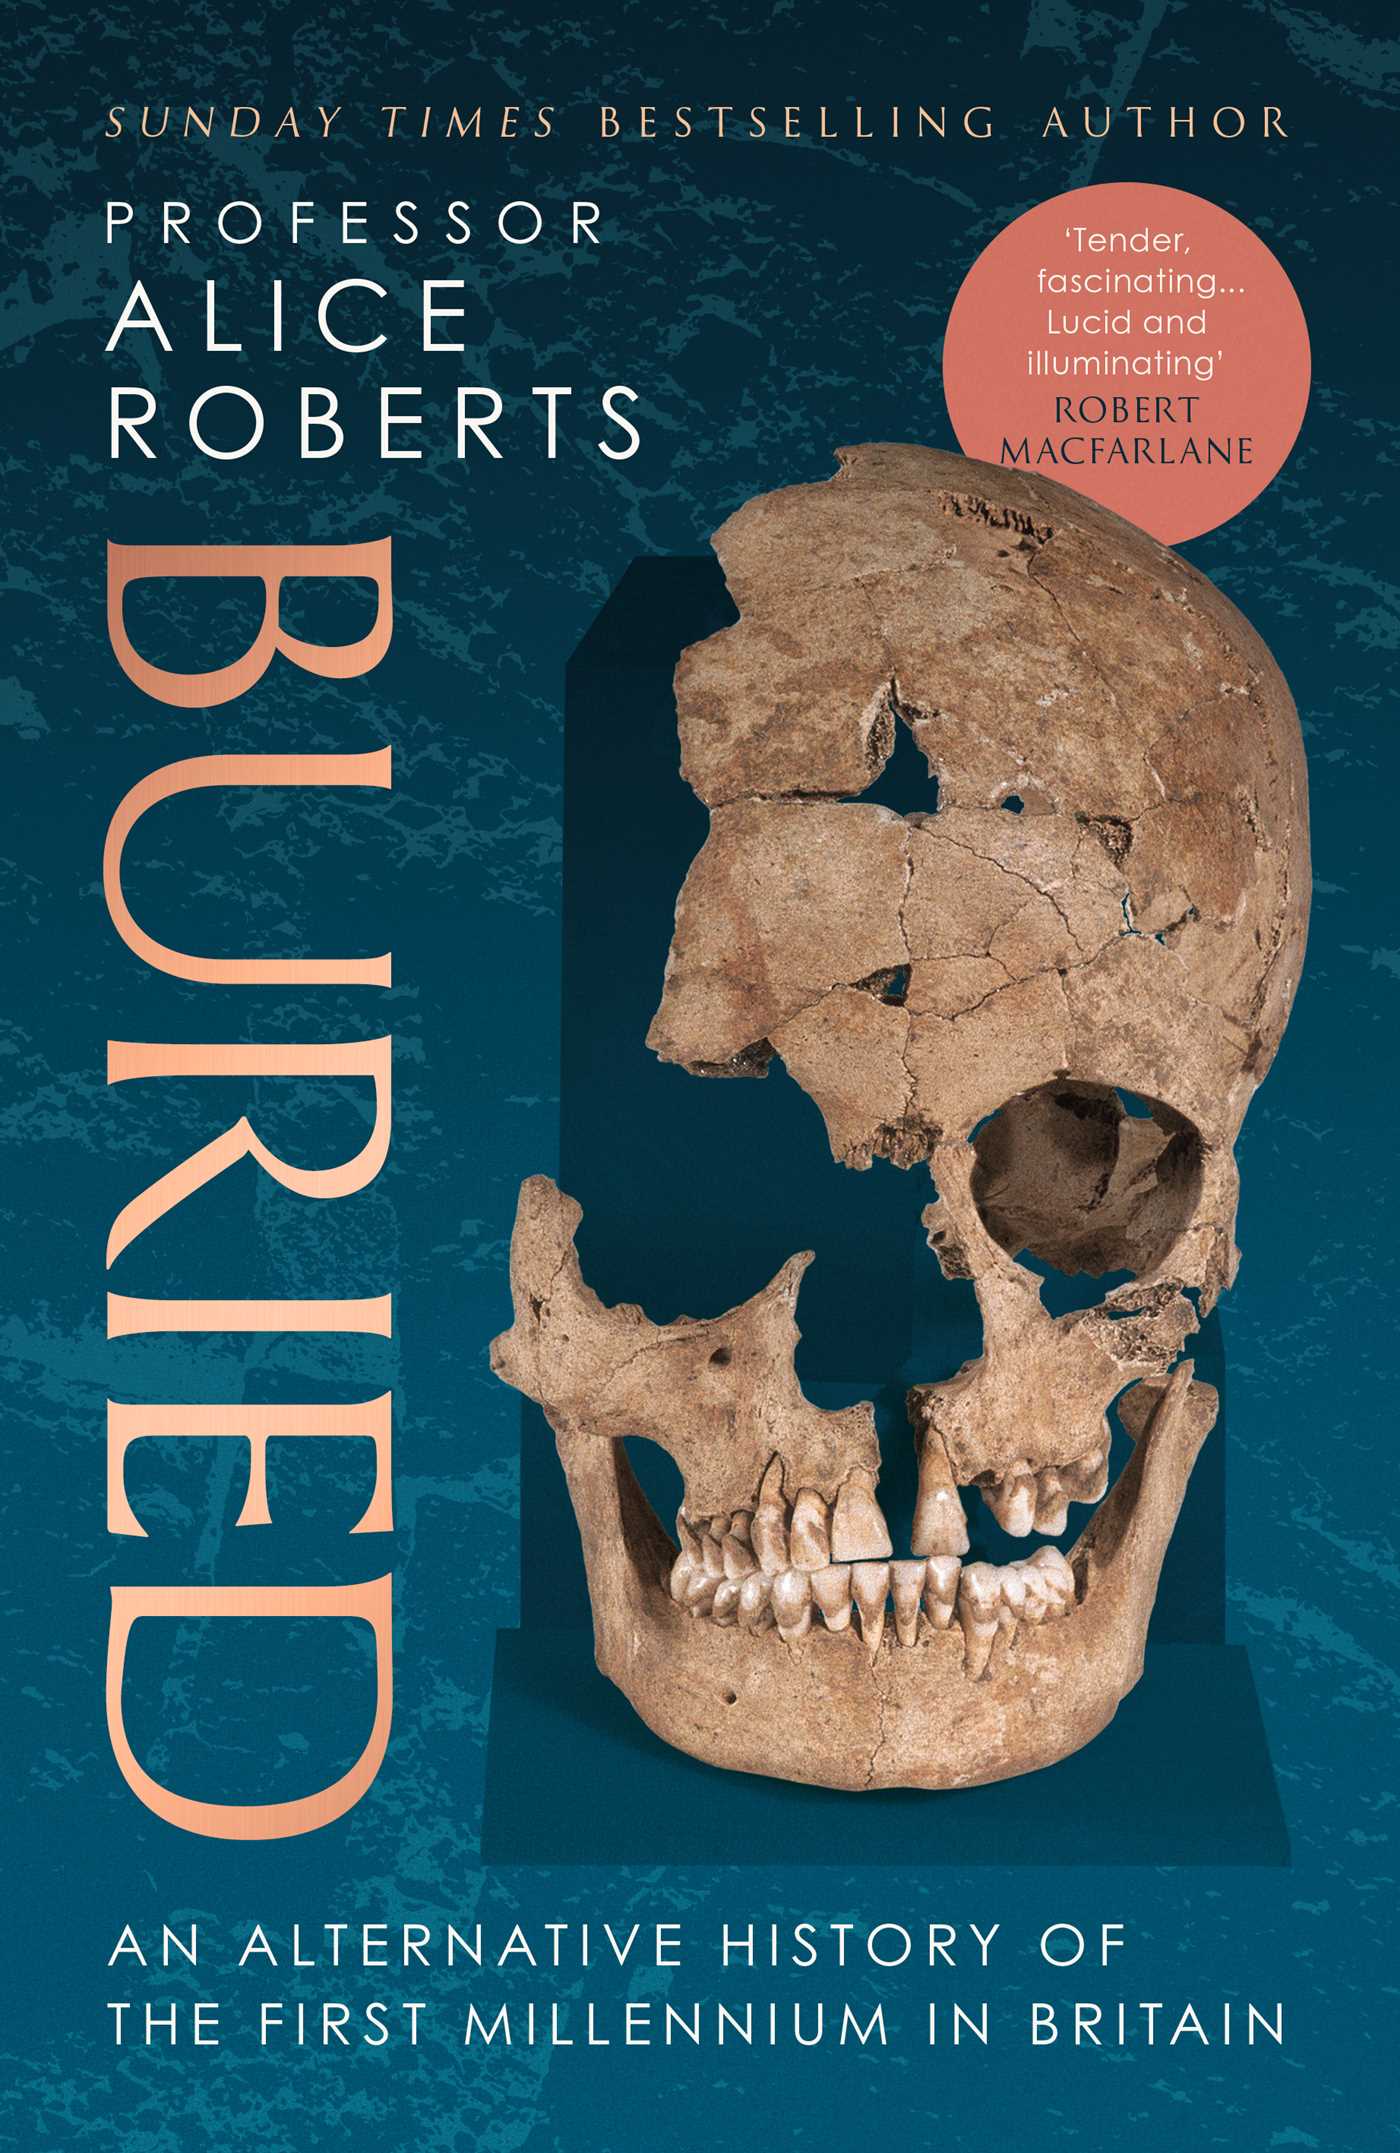 Buried (2022, Simon & Schuster, Limited)